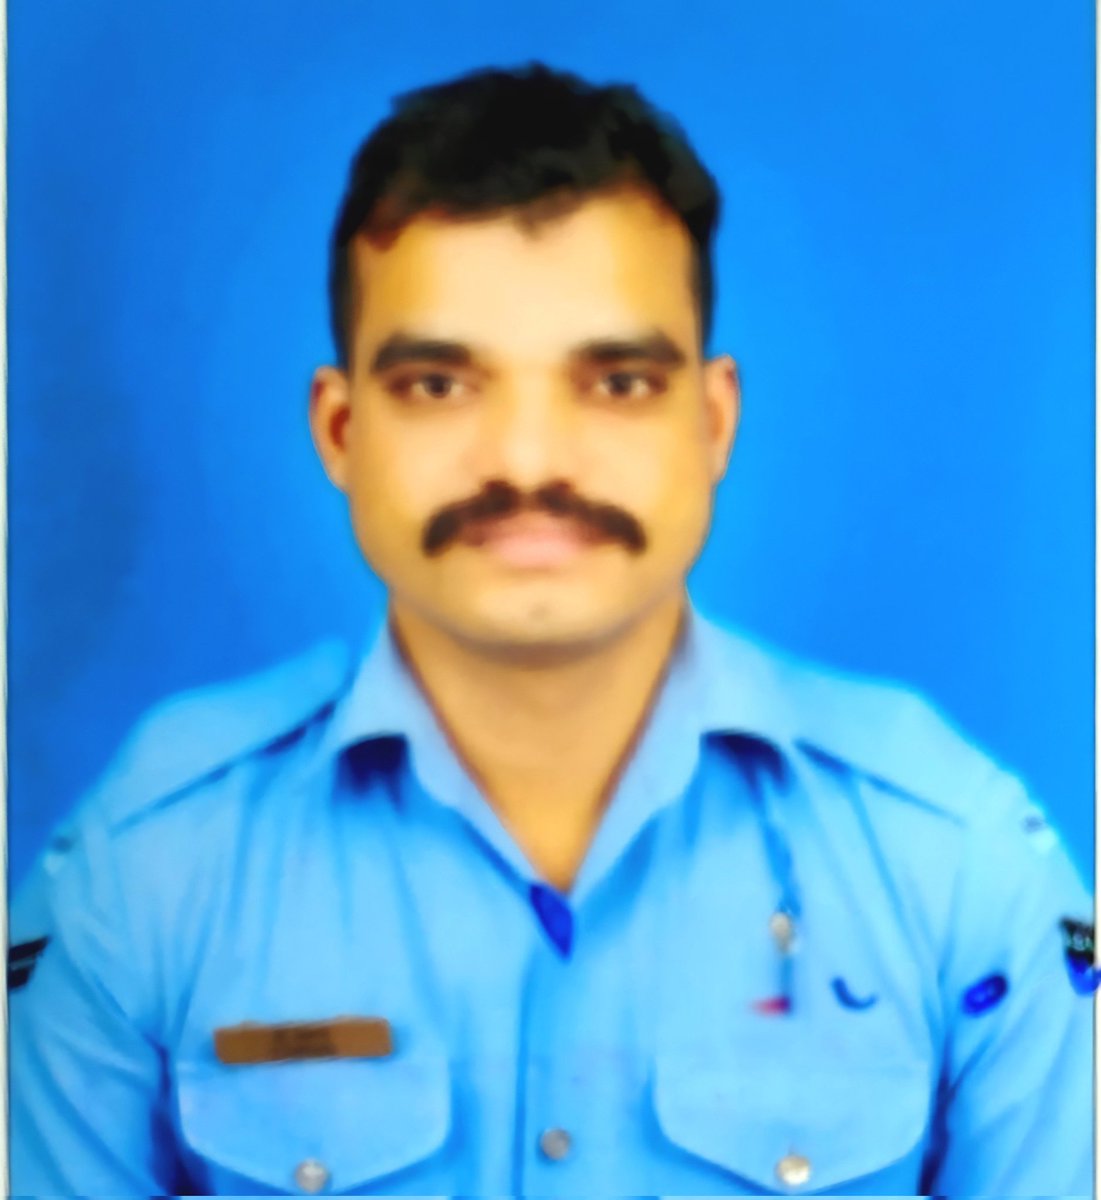 The CAS Air Chief Marshal VR Chaudhari & all personnel of Indian Air Force salute the braveheart Corporal #VikkyPahade, who made the supreme sacrifice in #Poonch Sector, in the service of the nation. Our deepest condolences to the bereaved family. We stand firmly by your side in…